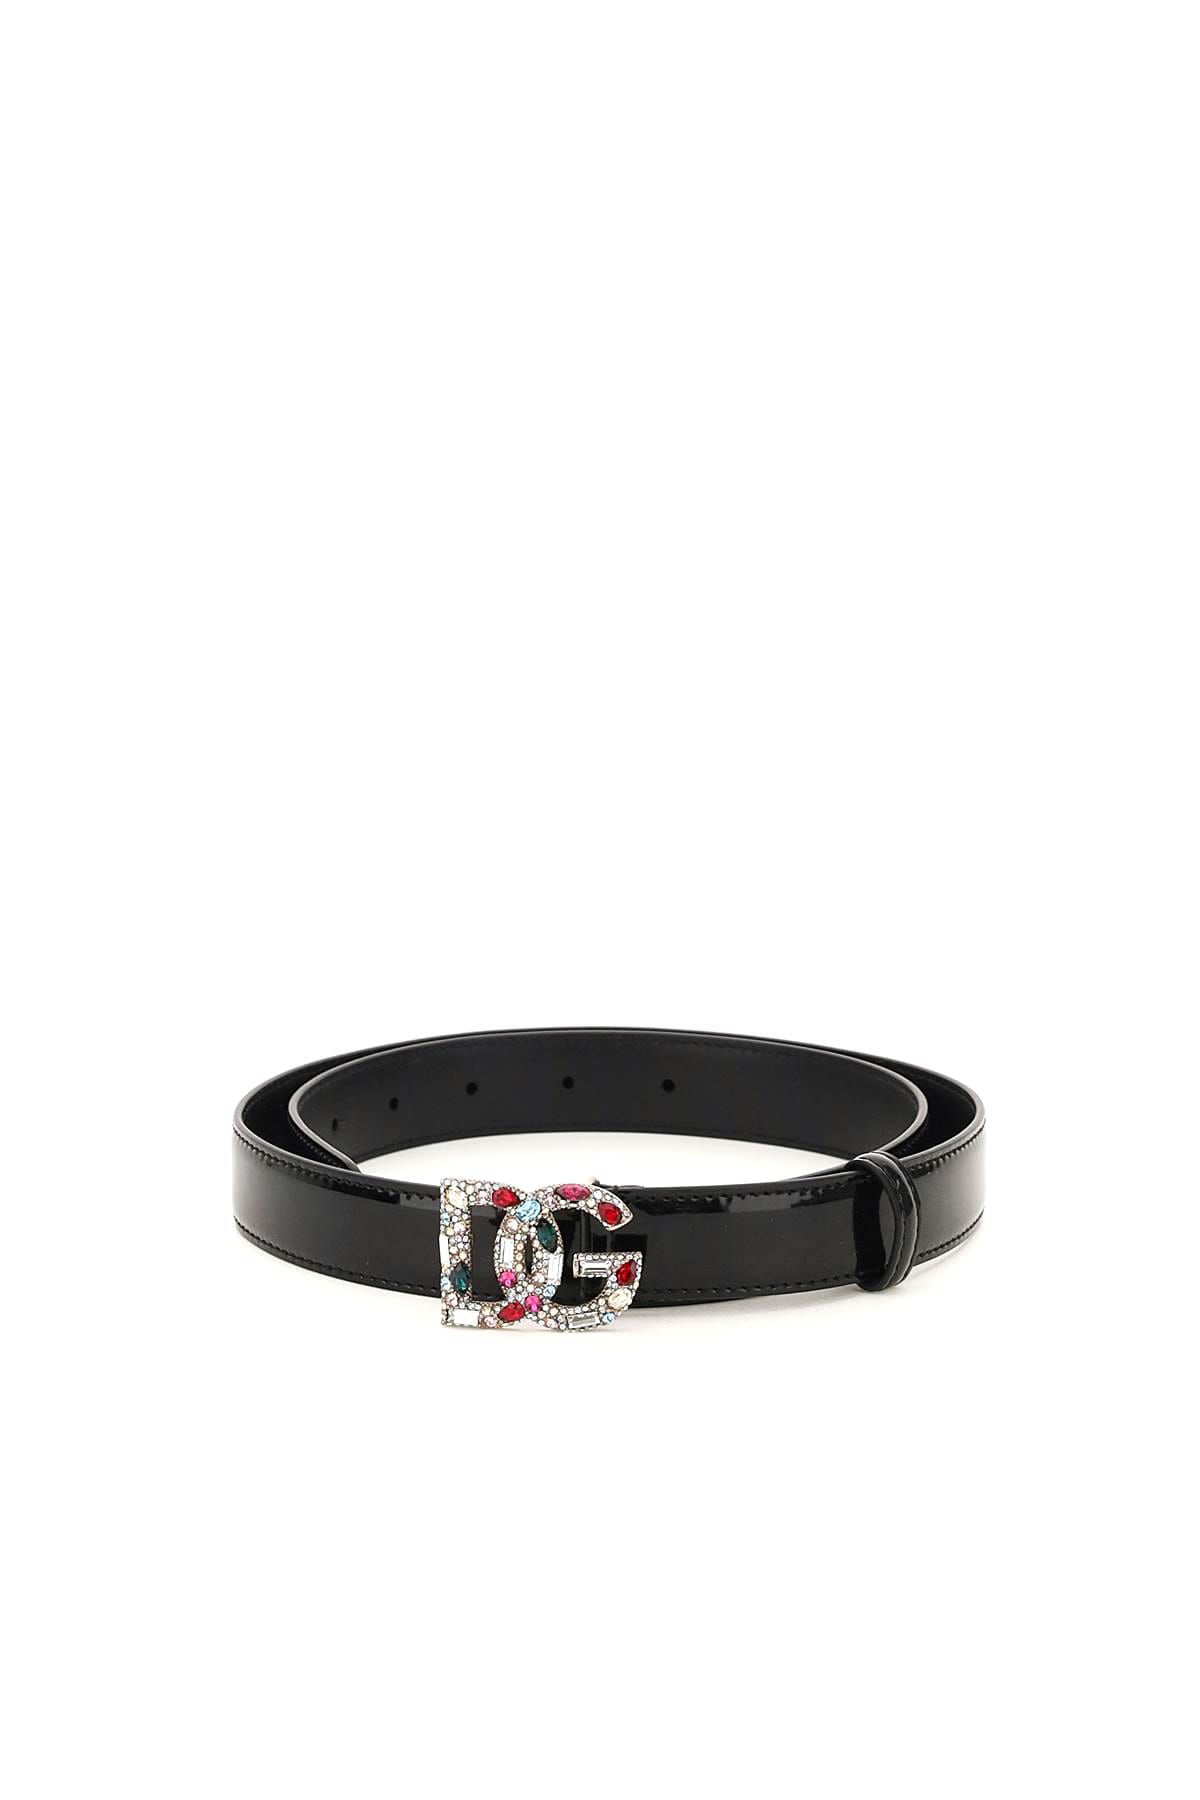 Dolce & Gabbana Patent Leather Belt With Crystal Logo Buckle